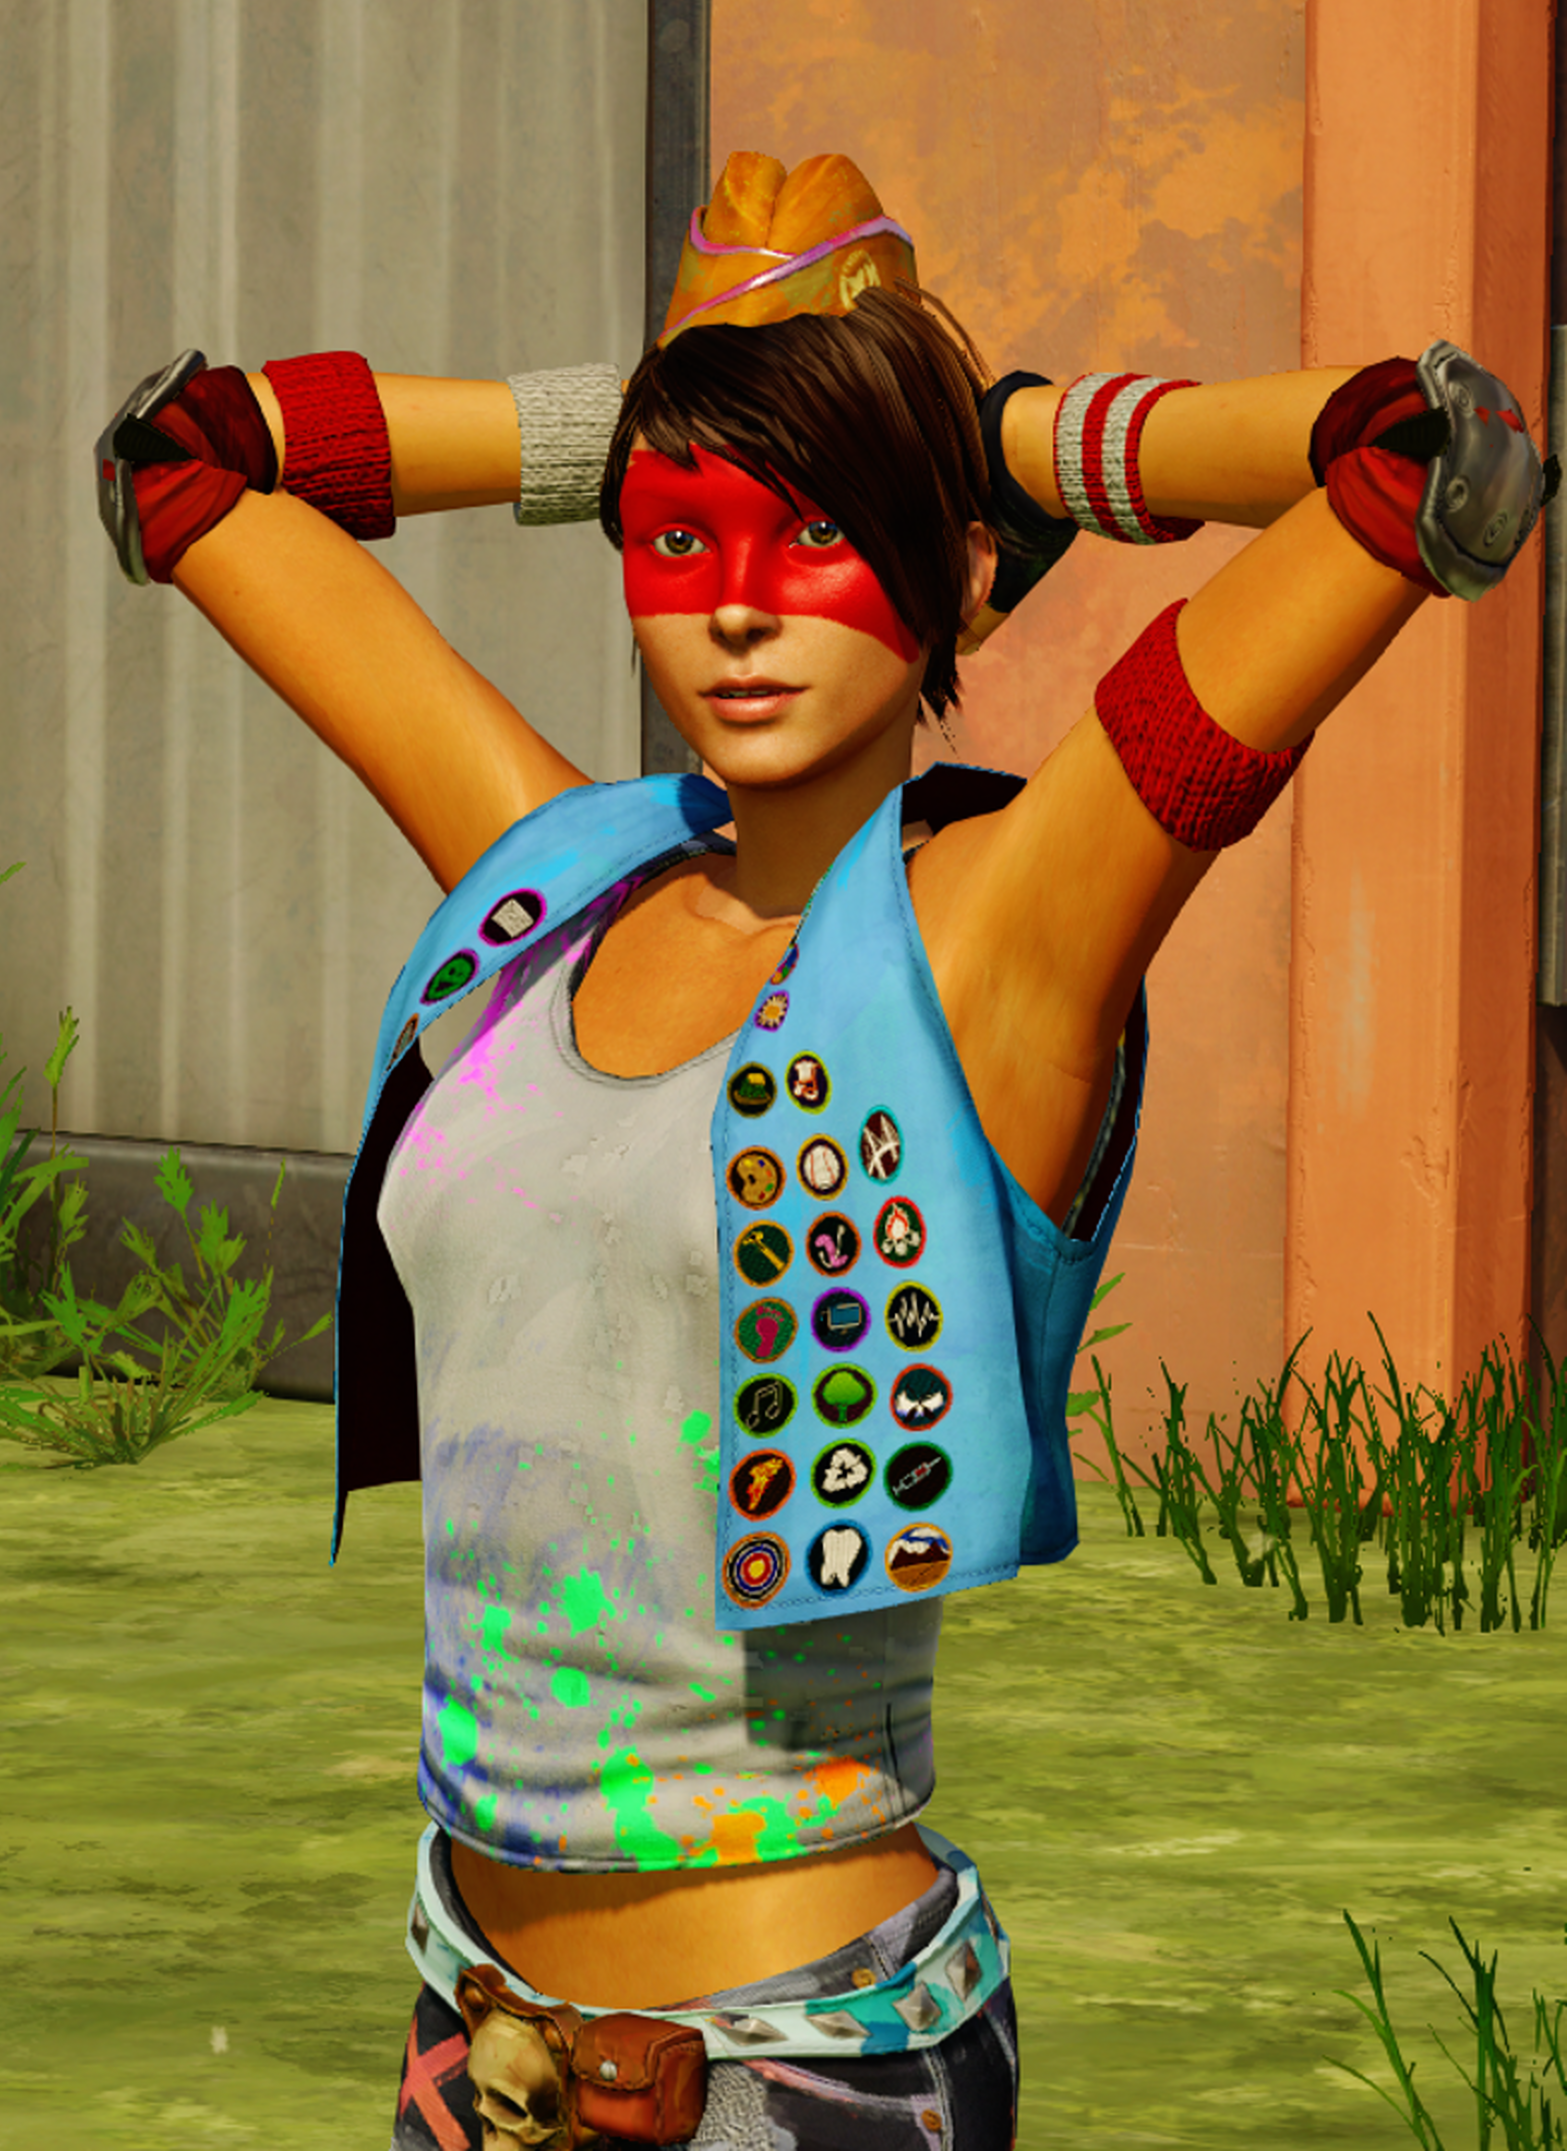 Sunset Overdrive embraces female characters, gender-neutral